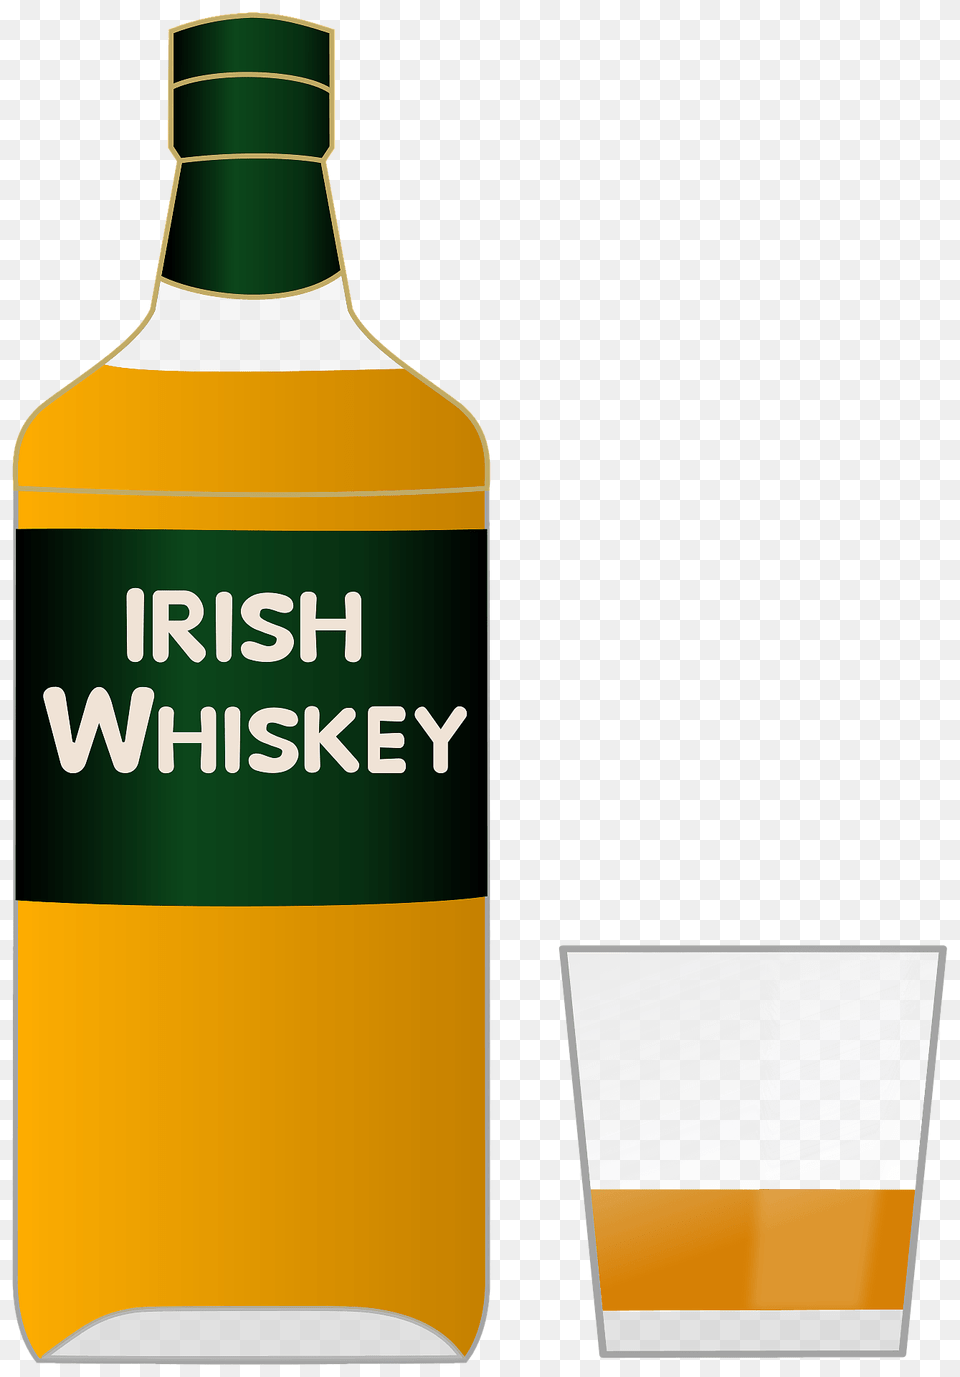 Bottle Of Irish Whiskey And A Glass Clipart, Alcohol, Beverage, Liquor, Beer Png